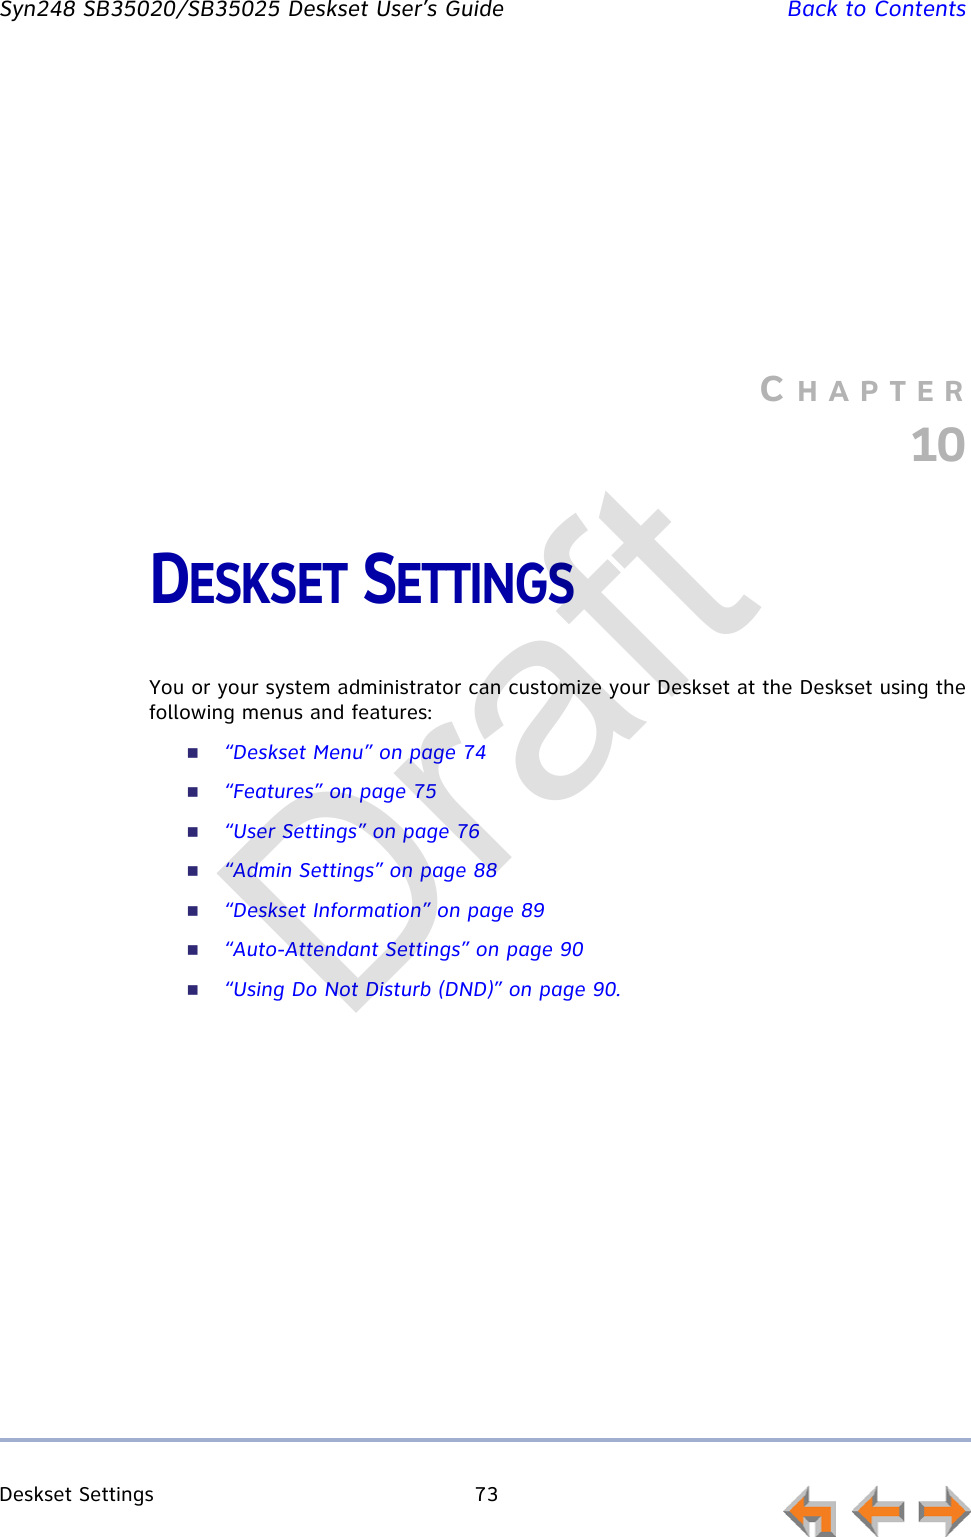 Deskset Settings 73         Syn248 SB35020/SB35025 Deskset User’s Guide Back to ContentsCHAPTER10DESKSET SETTINGSYou or your system administrator can customize your Deskset at the Deskset using the following menus and features:“Deskset Menu” on page 74“Features” on page 75“User Settings” on page 76“Admin Settings” on page 88“Deskset Information” on page 89“Auto-Attendant Settings” on page 90“Using Do Not Disturb (DND)” on page 90.Draft